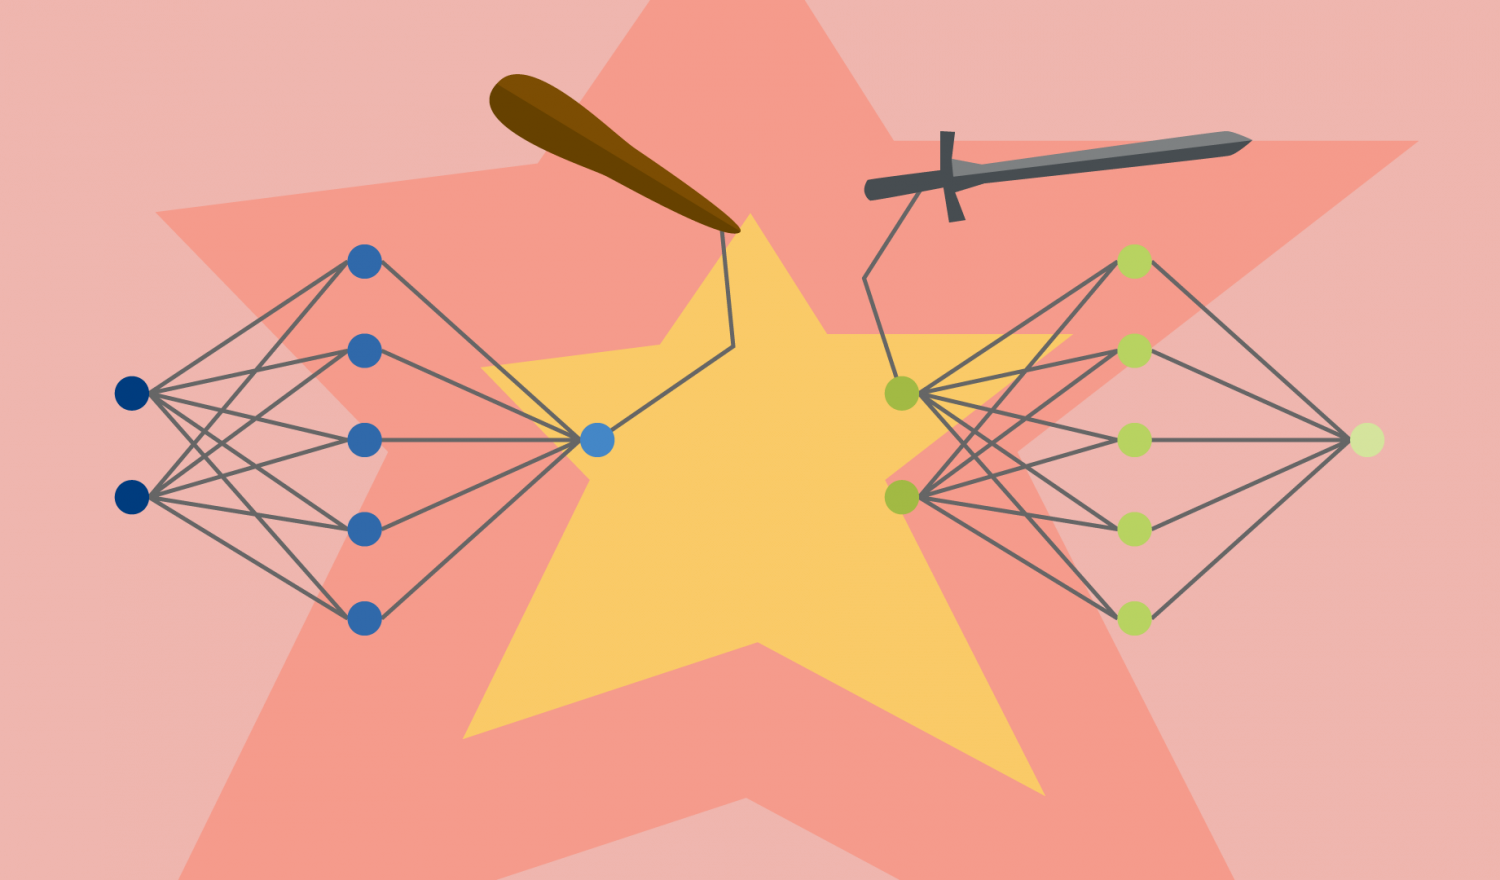 Two Neural Nets fighting with club and sword